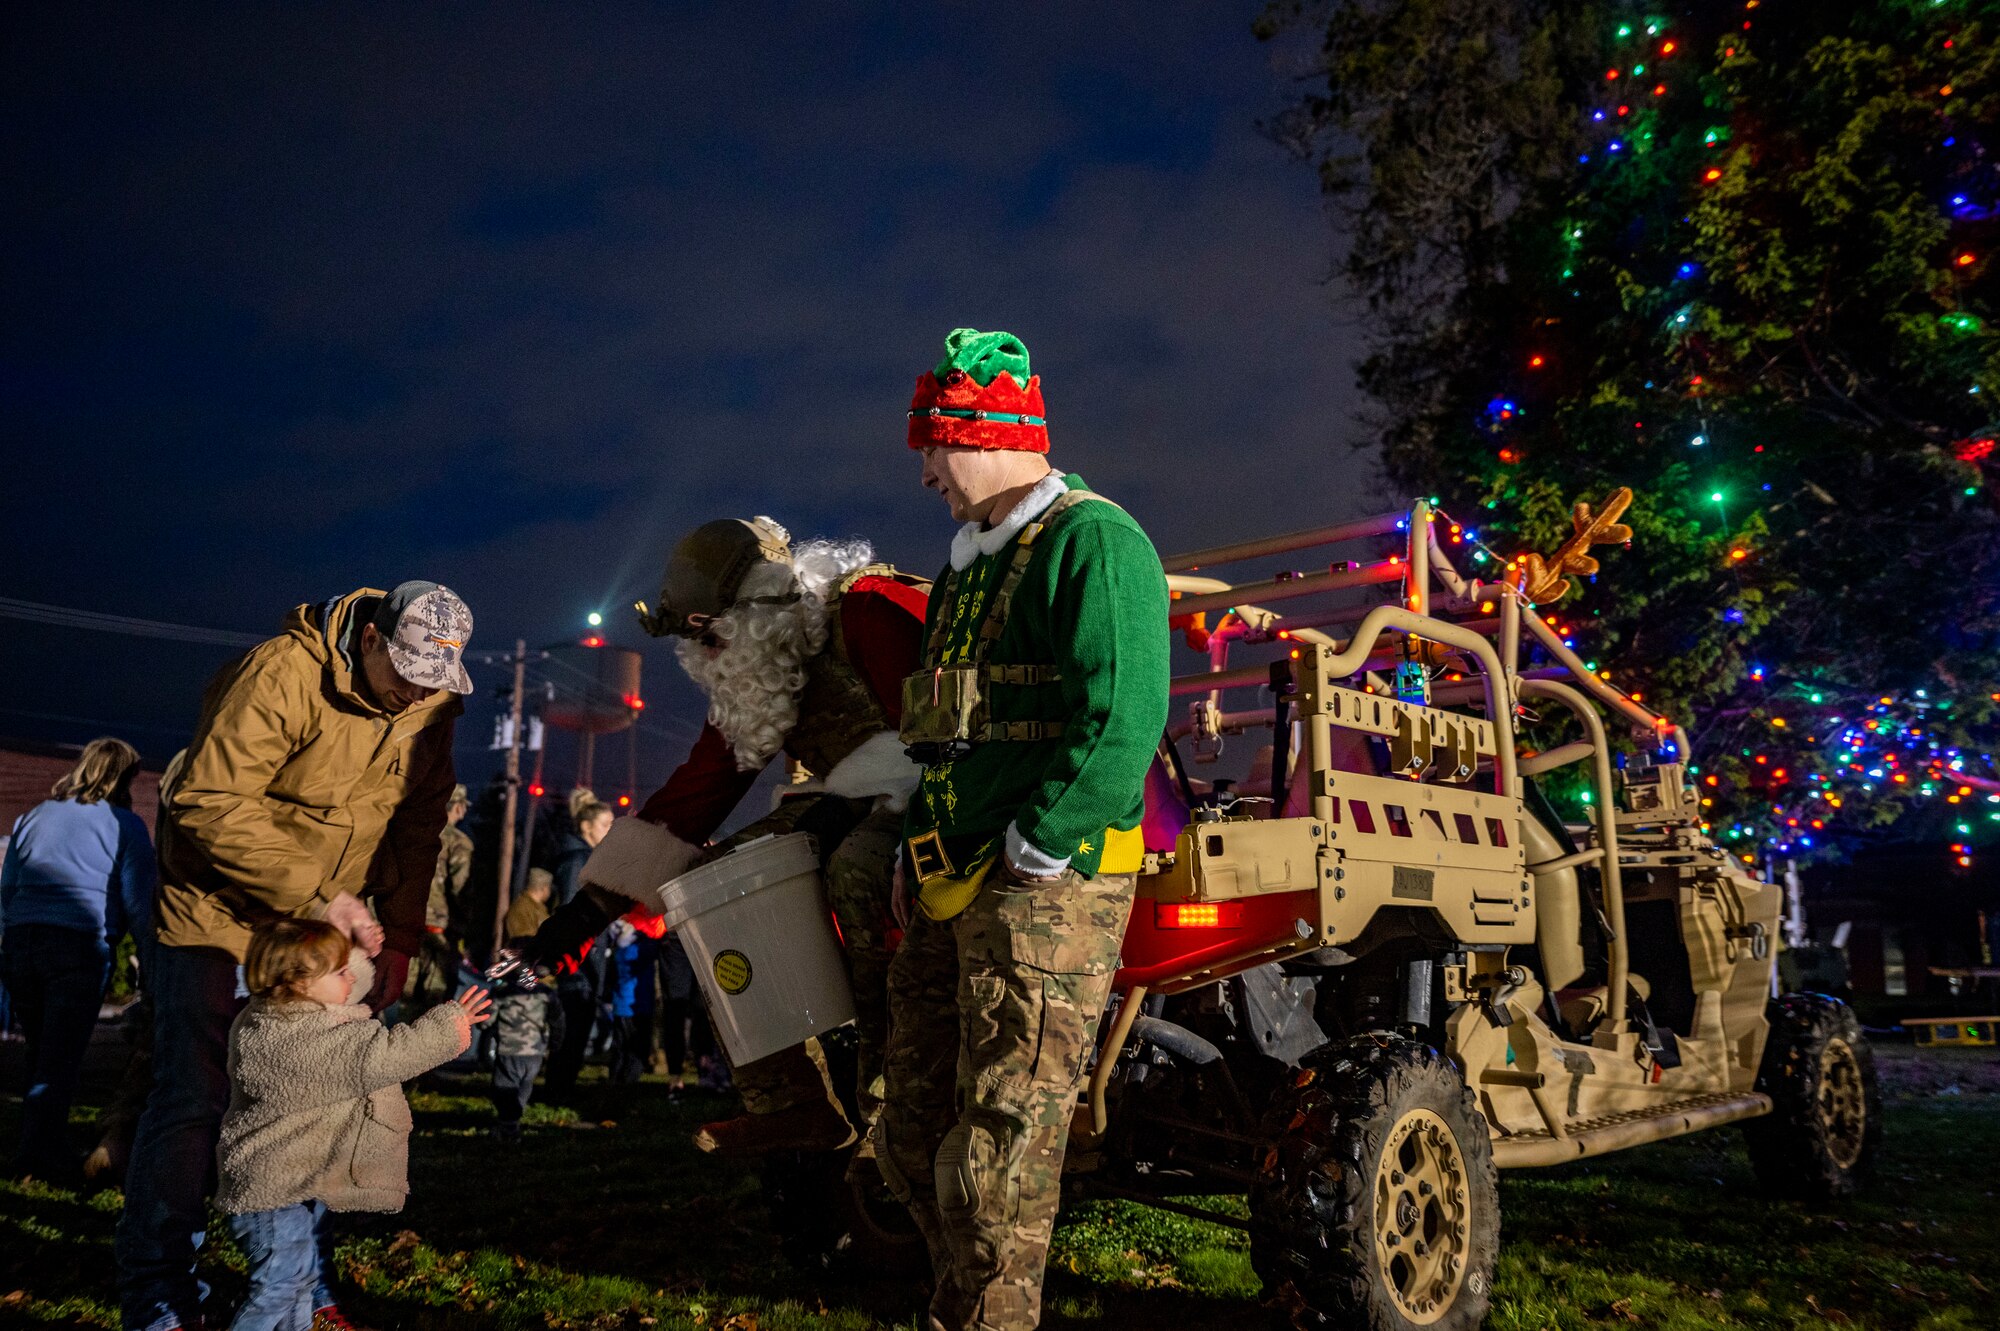 U.S. service members hand out candy canes to children at Joint Base Lewis-McChord, Washington, Dec. 2, 2021. The service members dressed up as Santa and his elf as part of a tree lighting ceremony at McChord Field. (U.S. Air photo by Airman First Class Charles Casner)